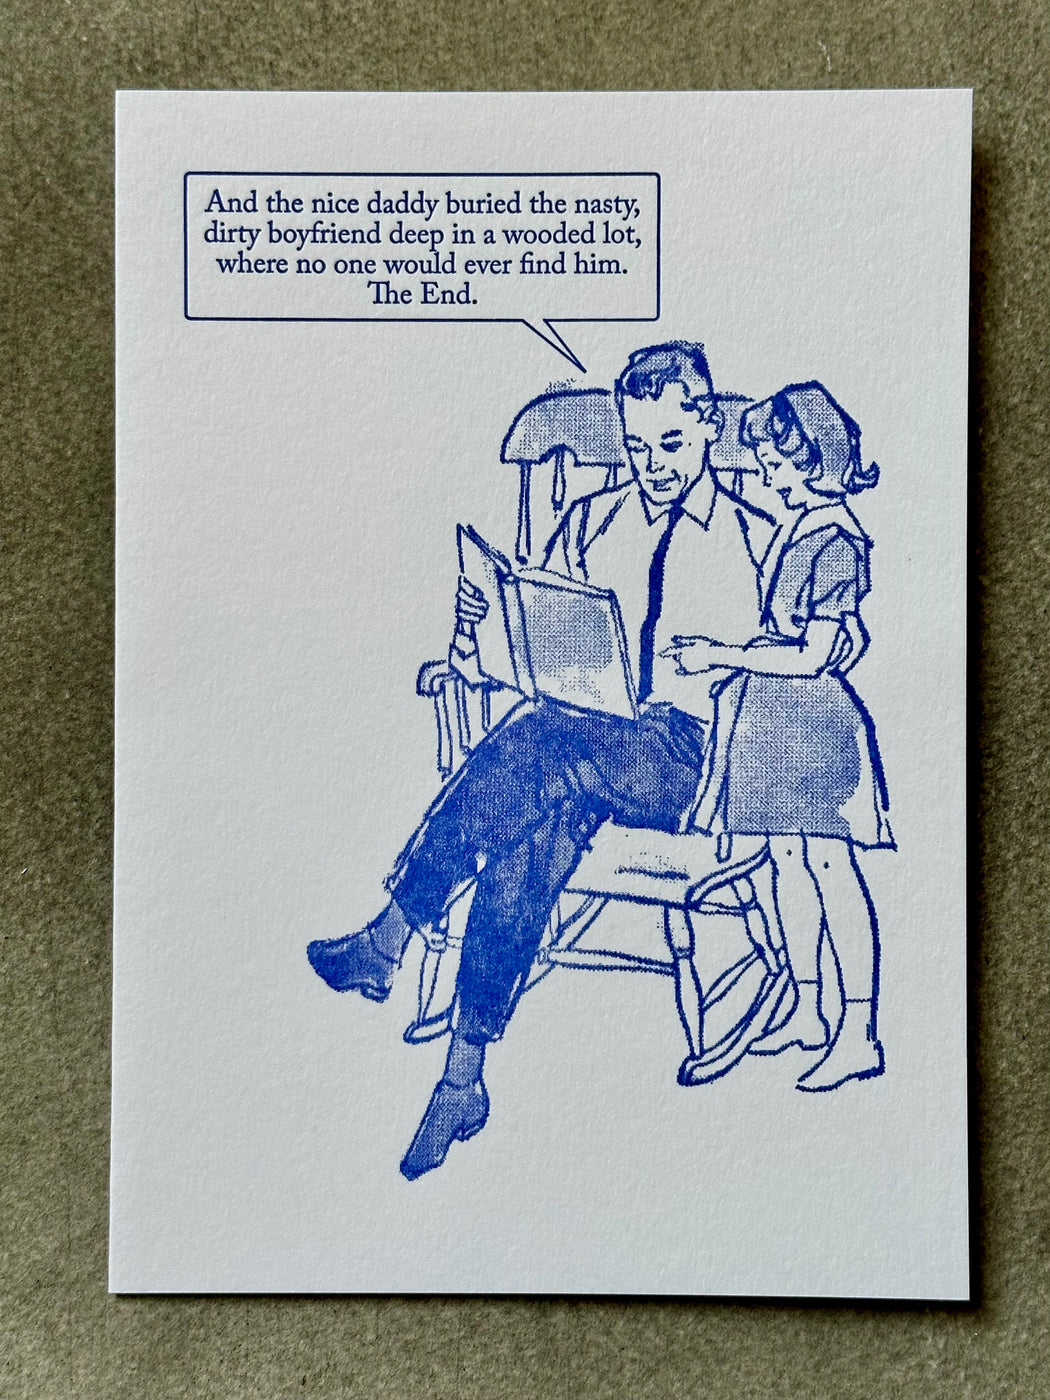 "And the nice daddy buried the nasty boyfriend..." Card by Archivist Gallery